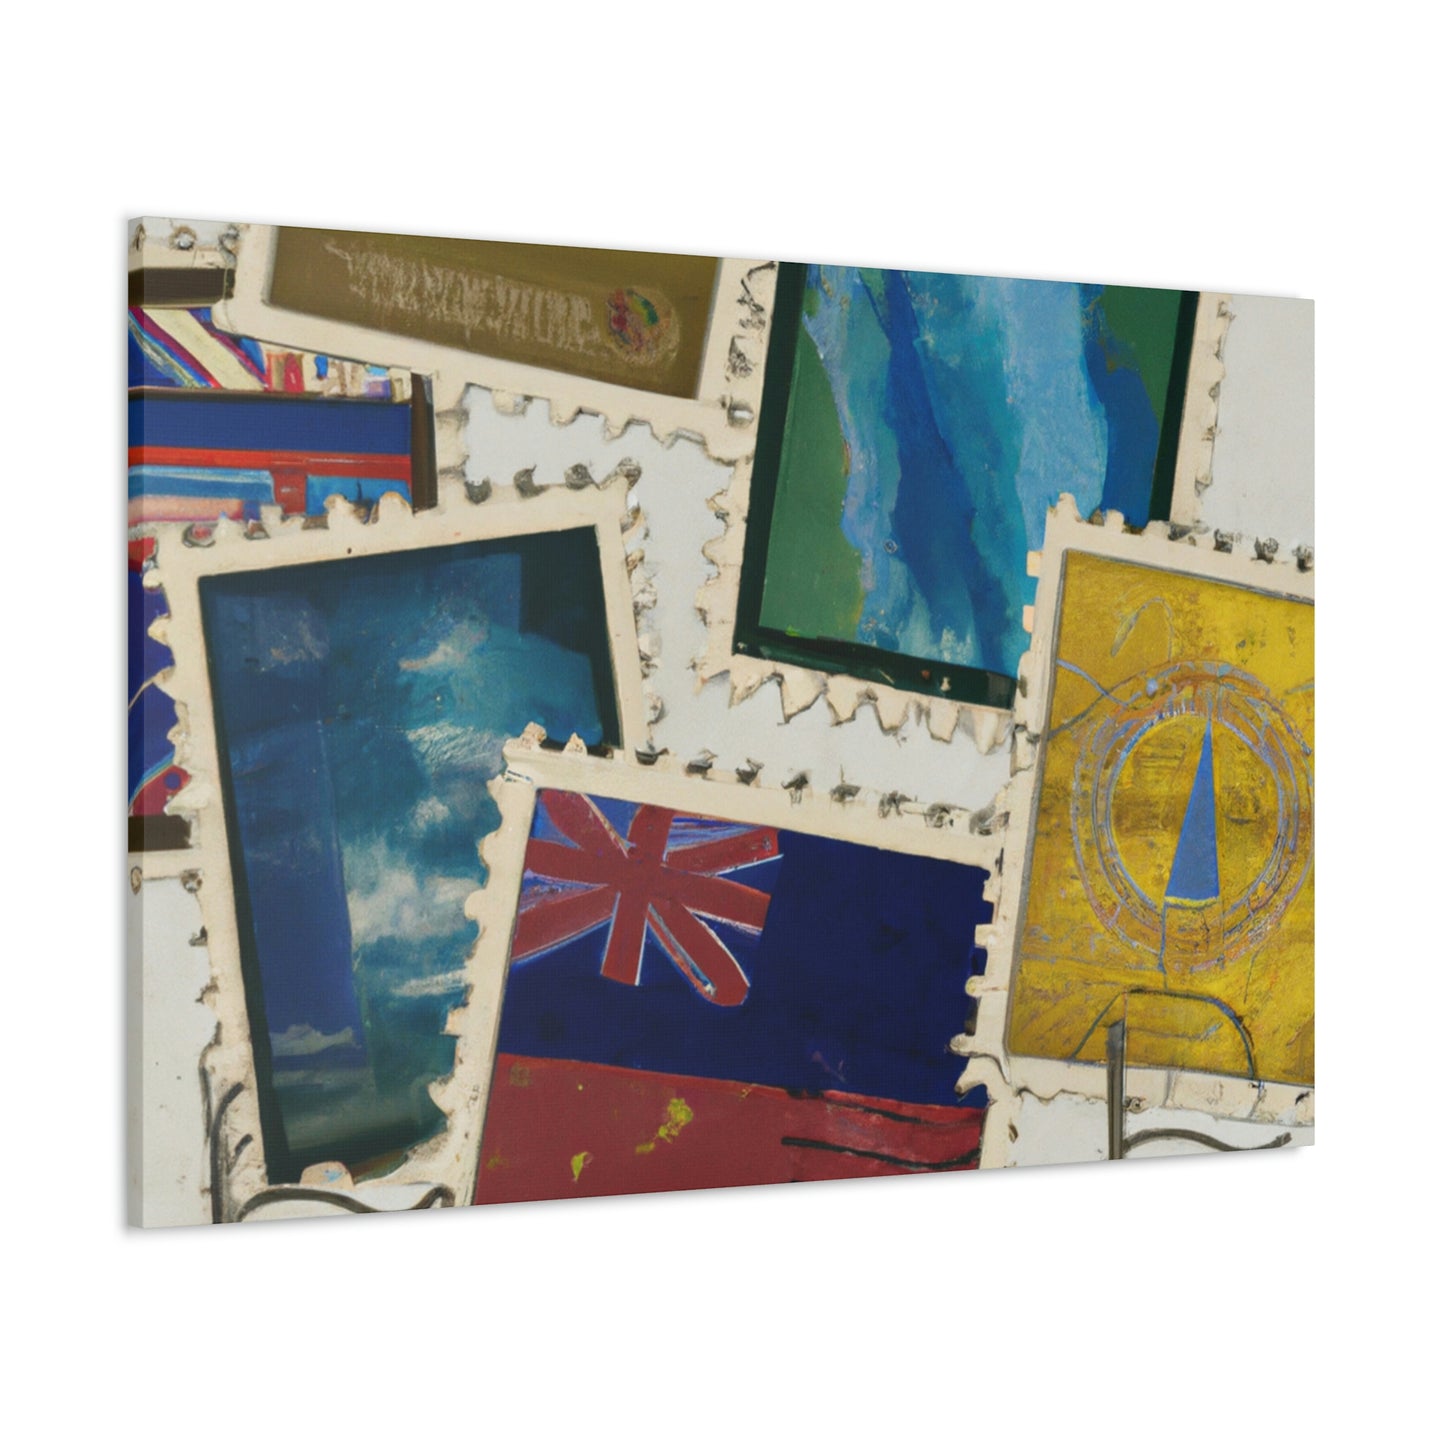 UniStamps: A Celebration of Unity. - Postage Stamp Collector Canvas Wall Art